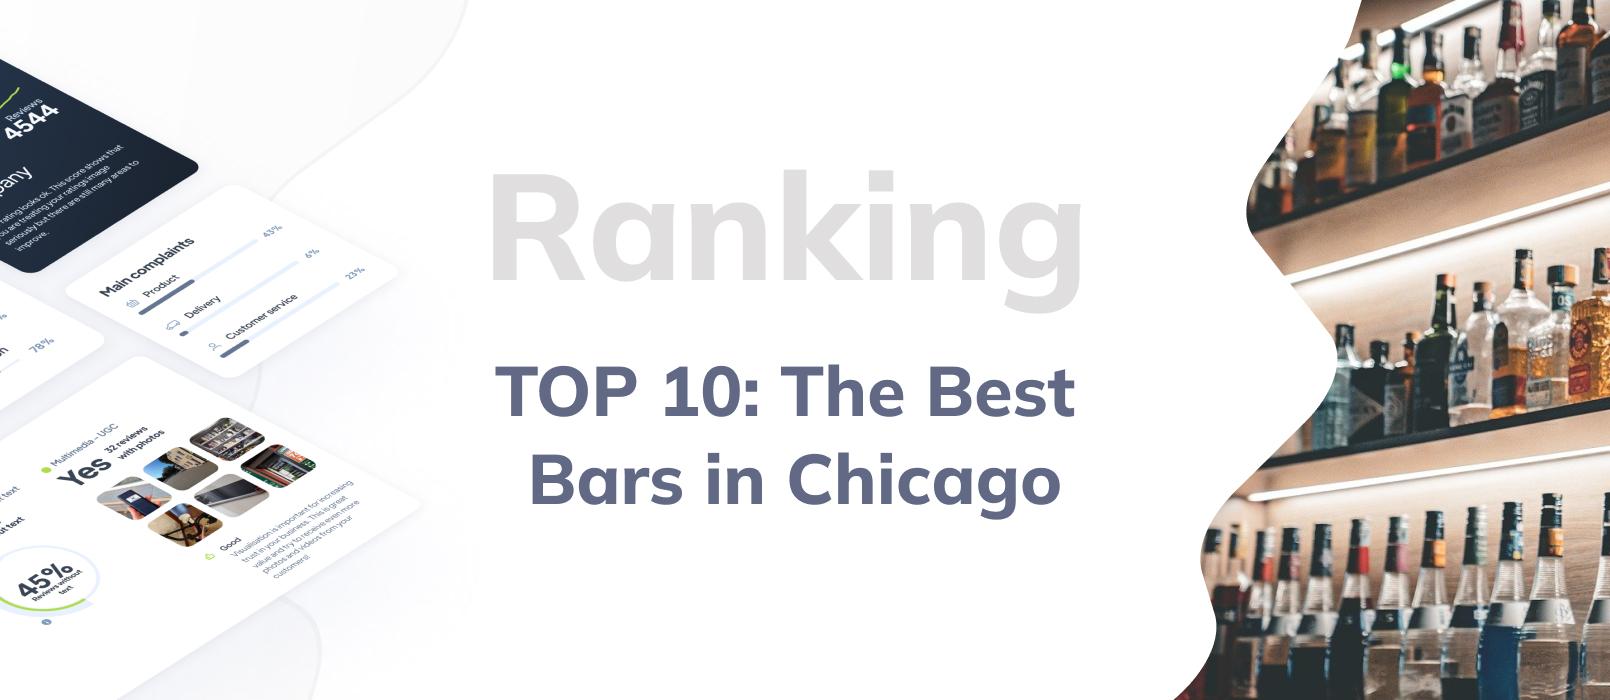 Bars in Chicago - TOP 10 ranking